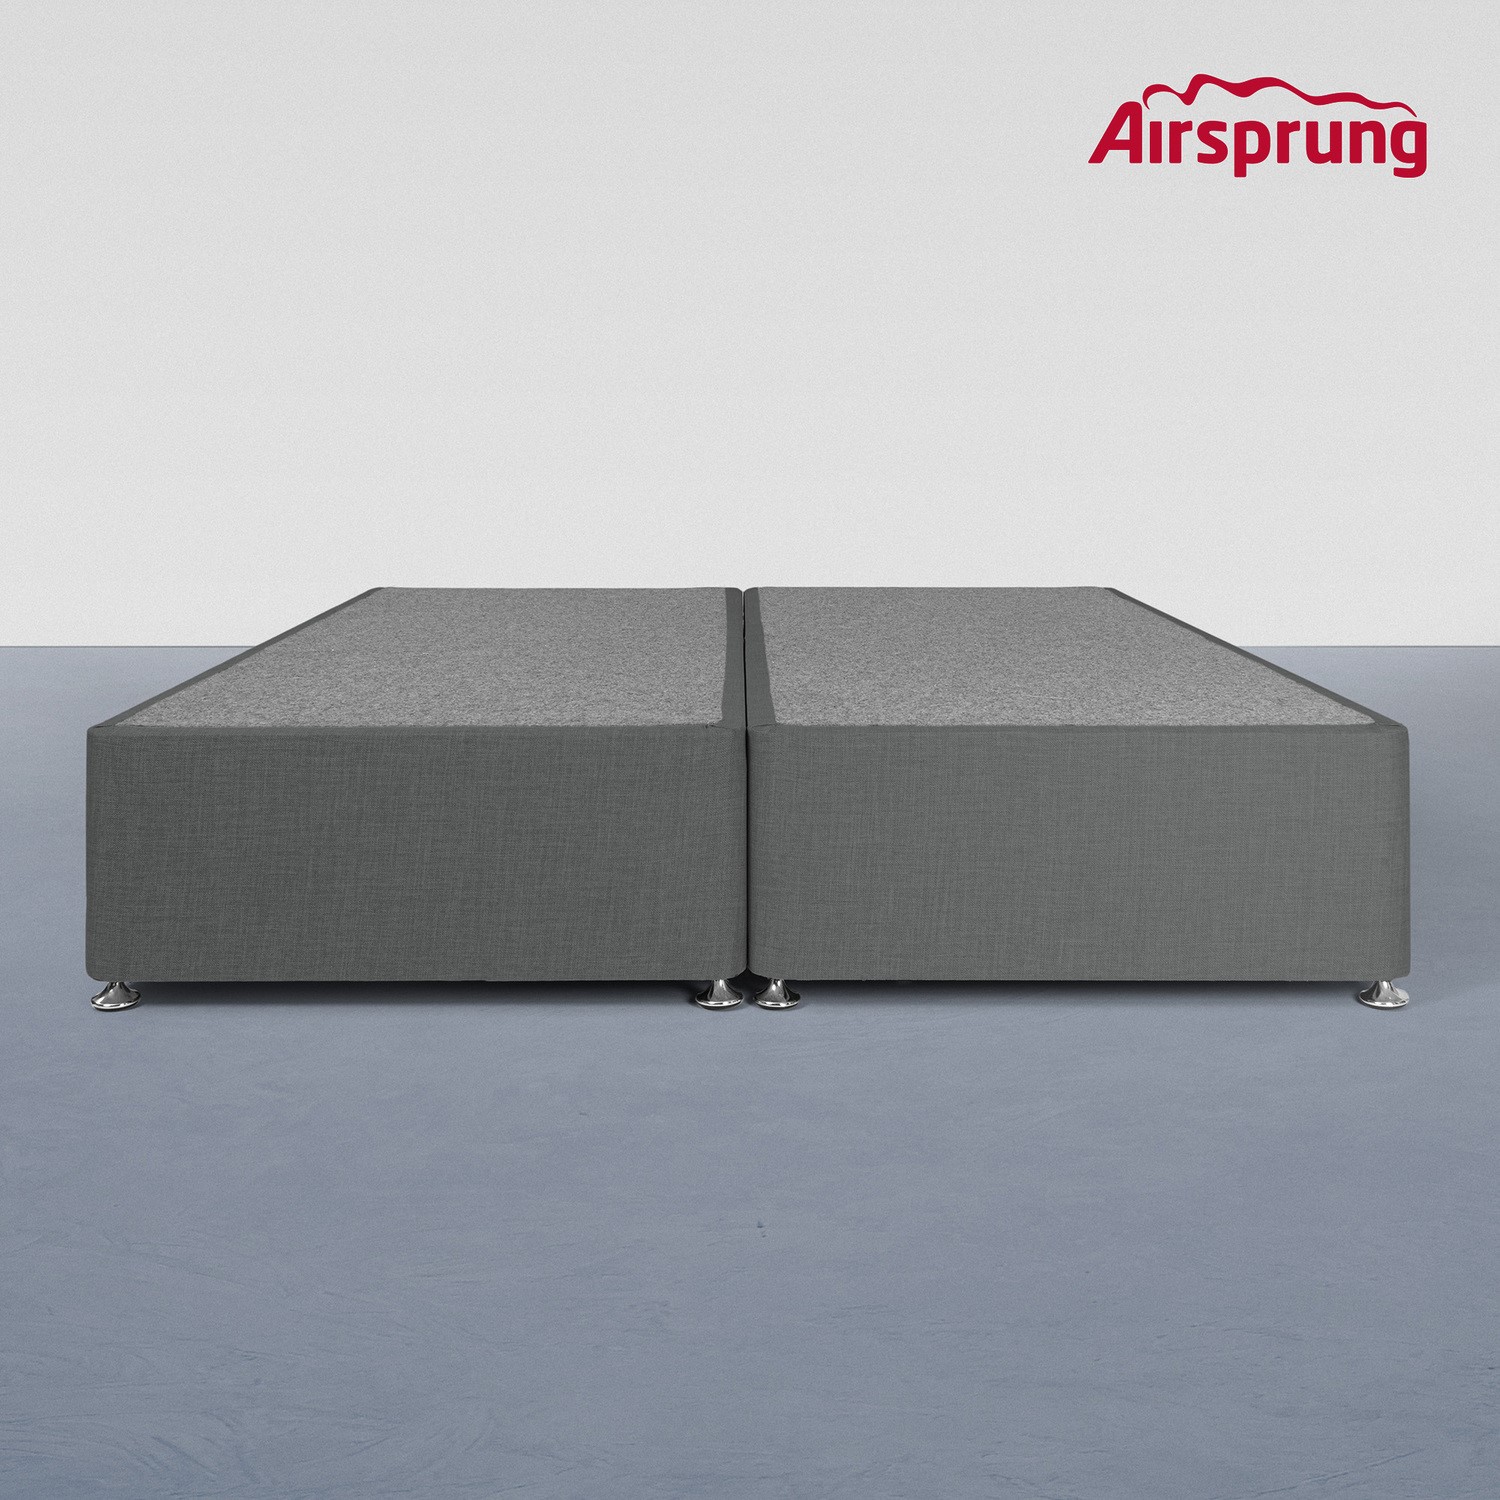 Read more about Airsprung kelston super king 2 drawer divan charcoal